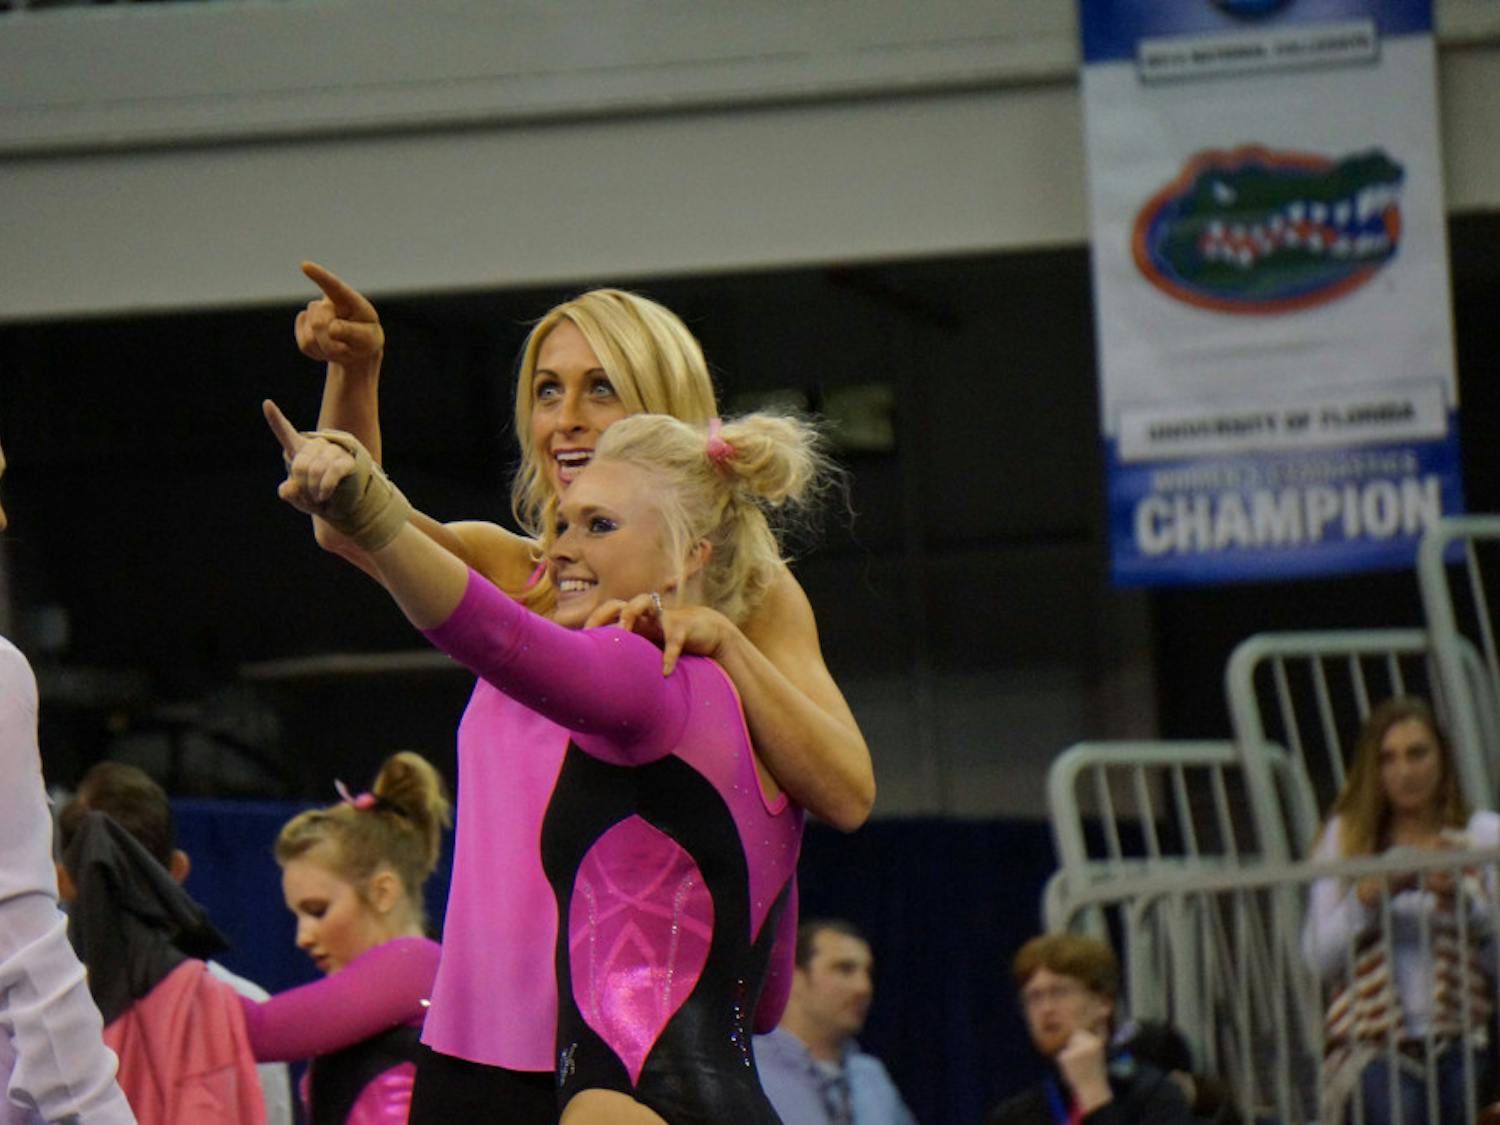 Rachel Spicer and coach Rhonda Faehn point to Spicer's mom in the O'Connell Center crowd during Florida's win against Kentucky on Feb. 27